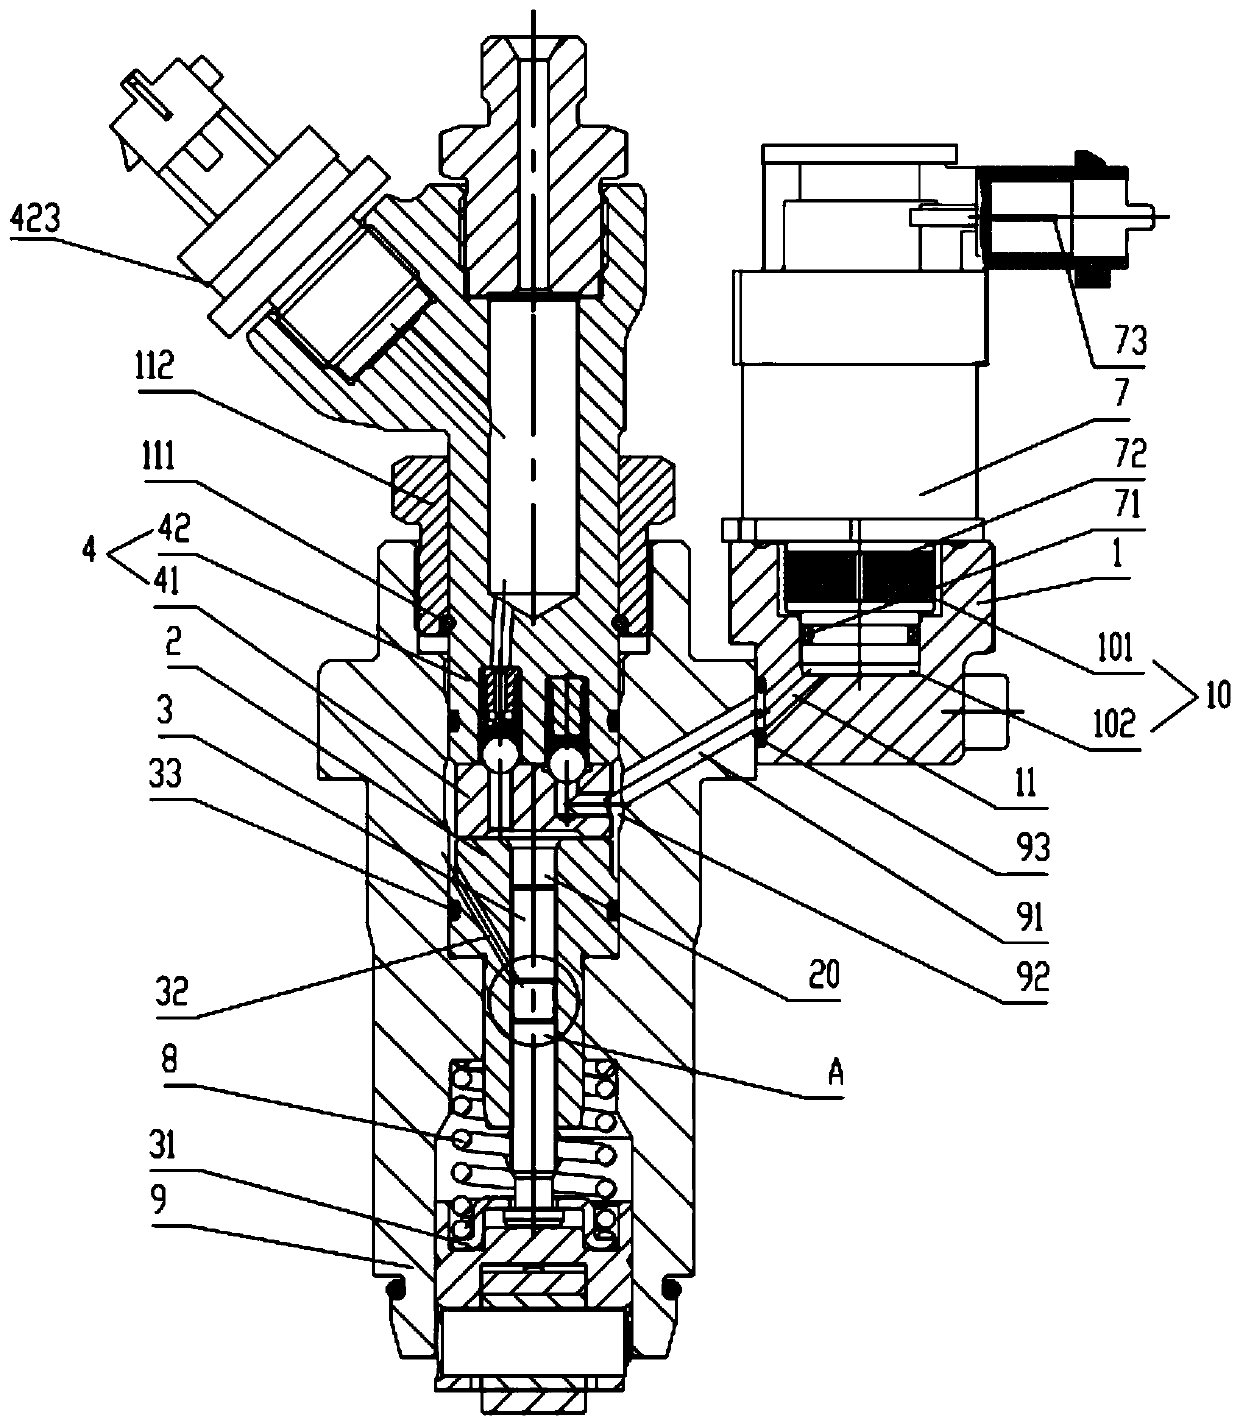 Unit common-rail pump assembly for single cylinder diesel